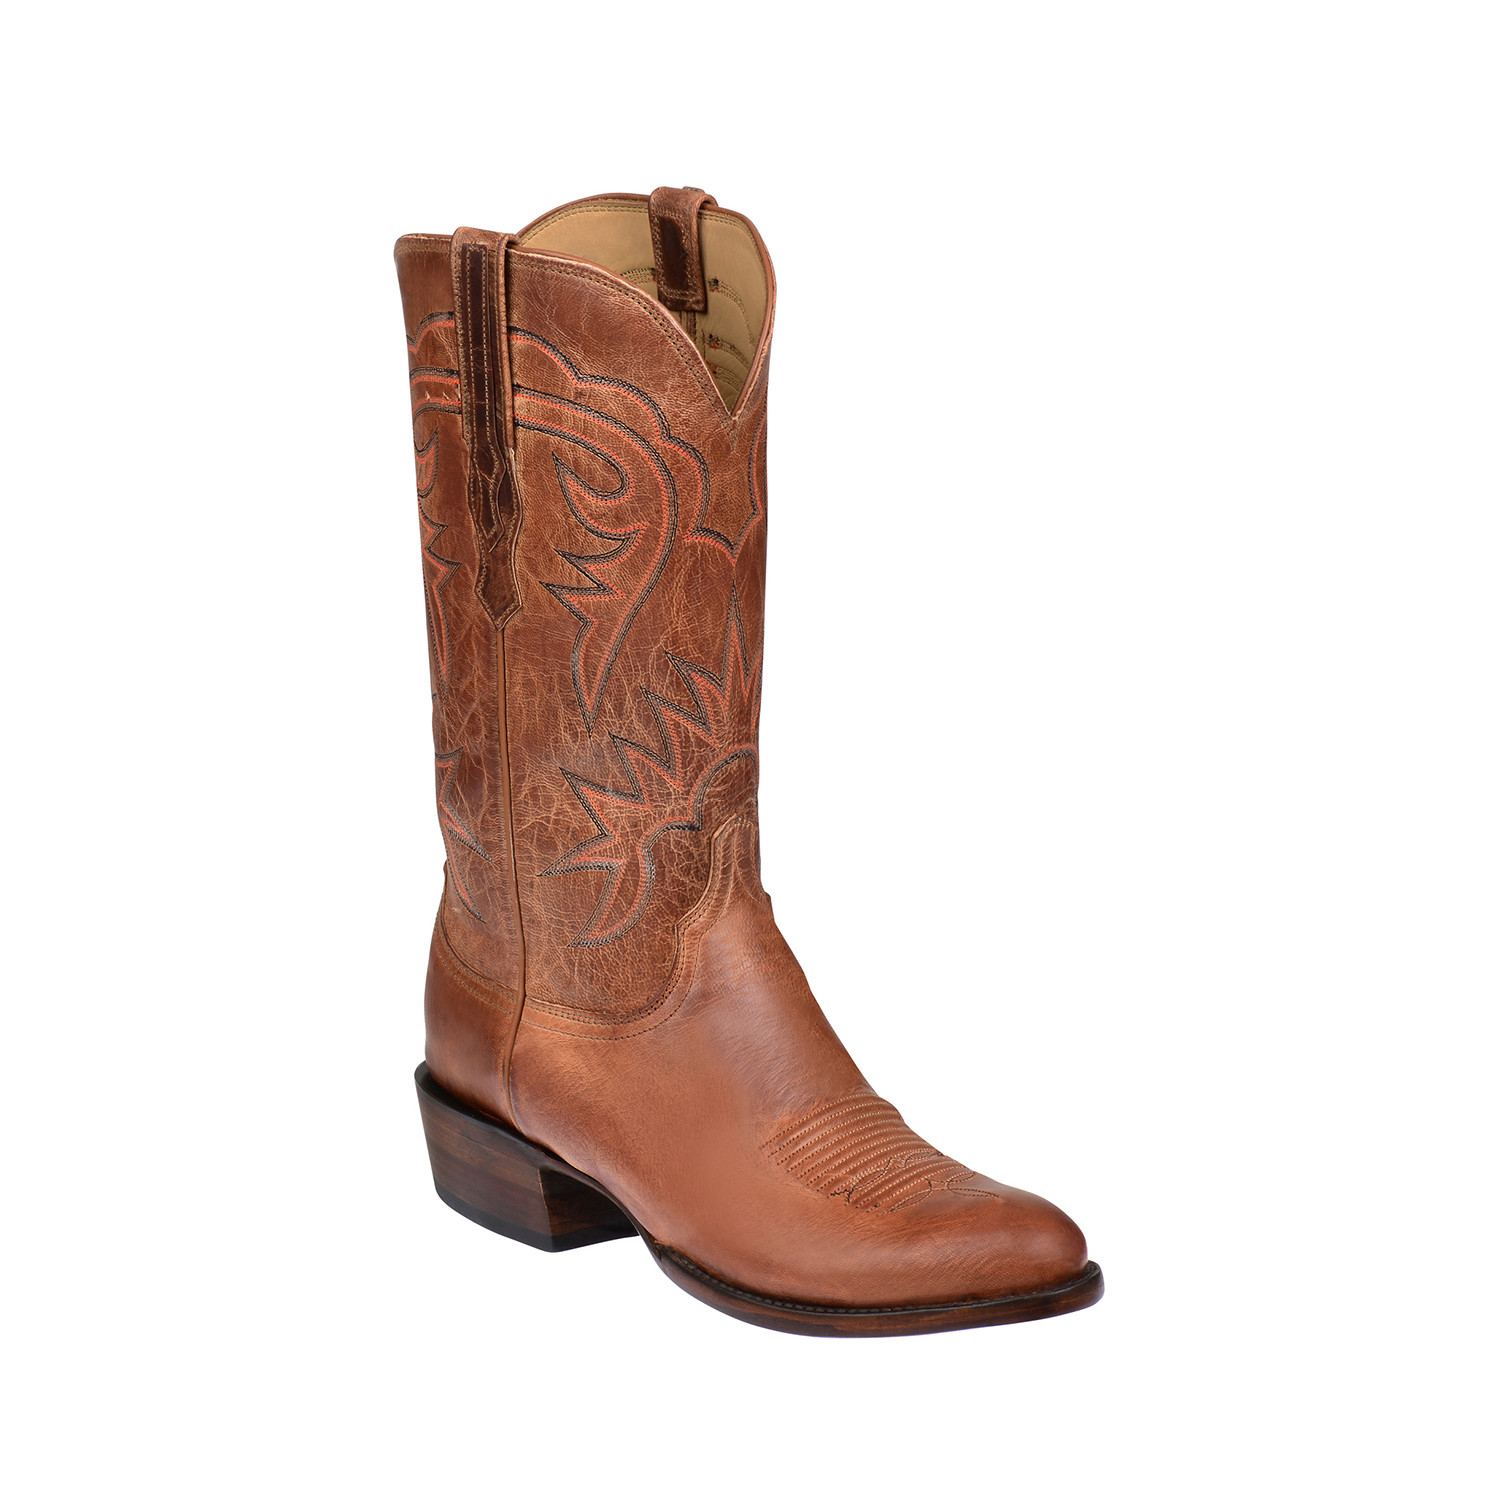 Goat Skin Round Toe Western Boot // Tan // EE (Wide) (US: 8) - Lucchese ...